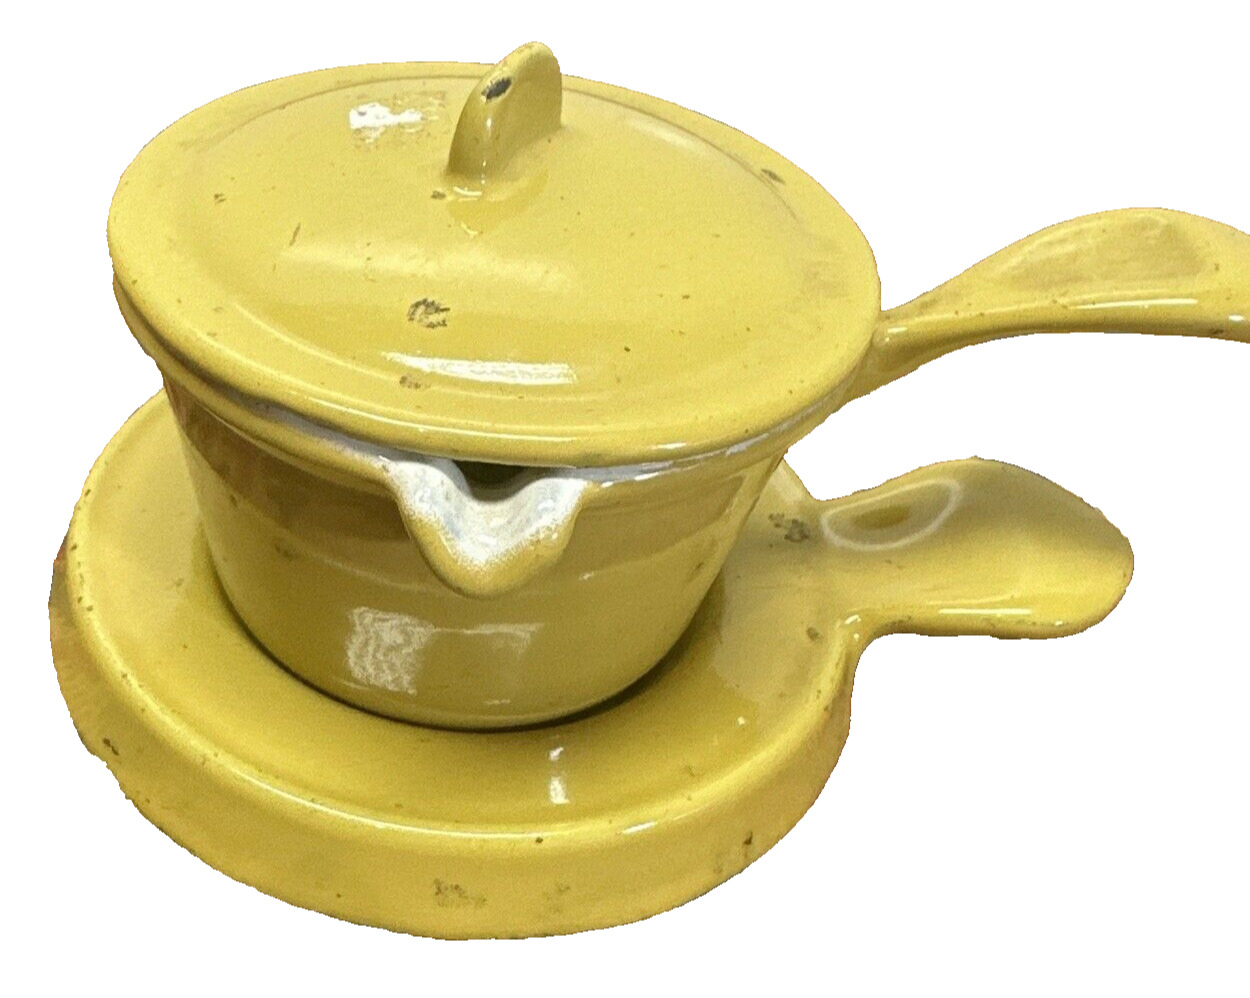 Vintage Descoware Butter Warmer Flaming Yellow with lid and trivet Belgium